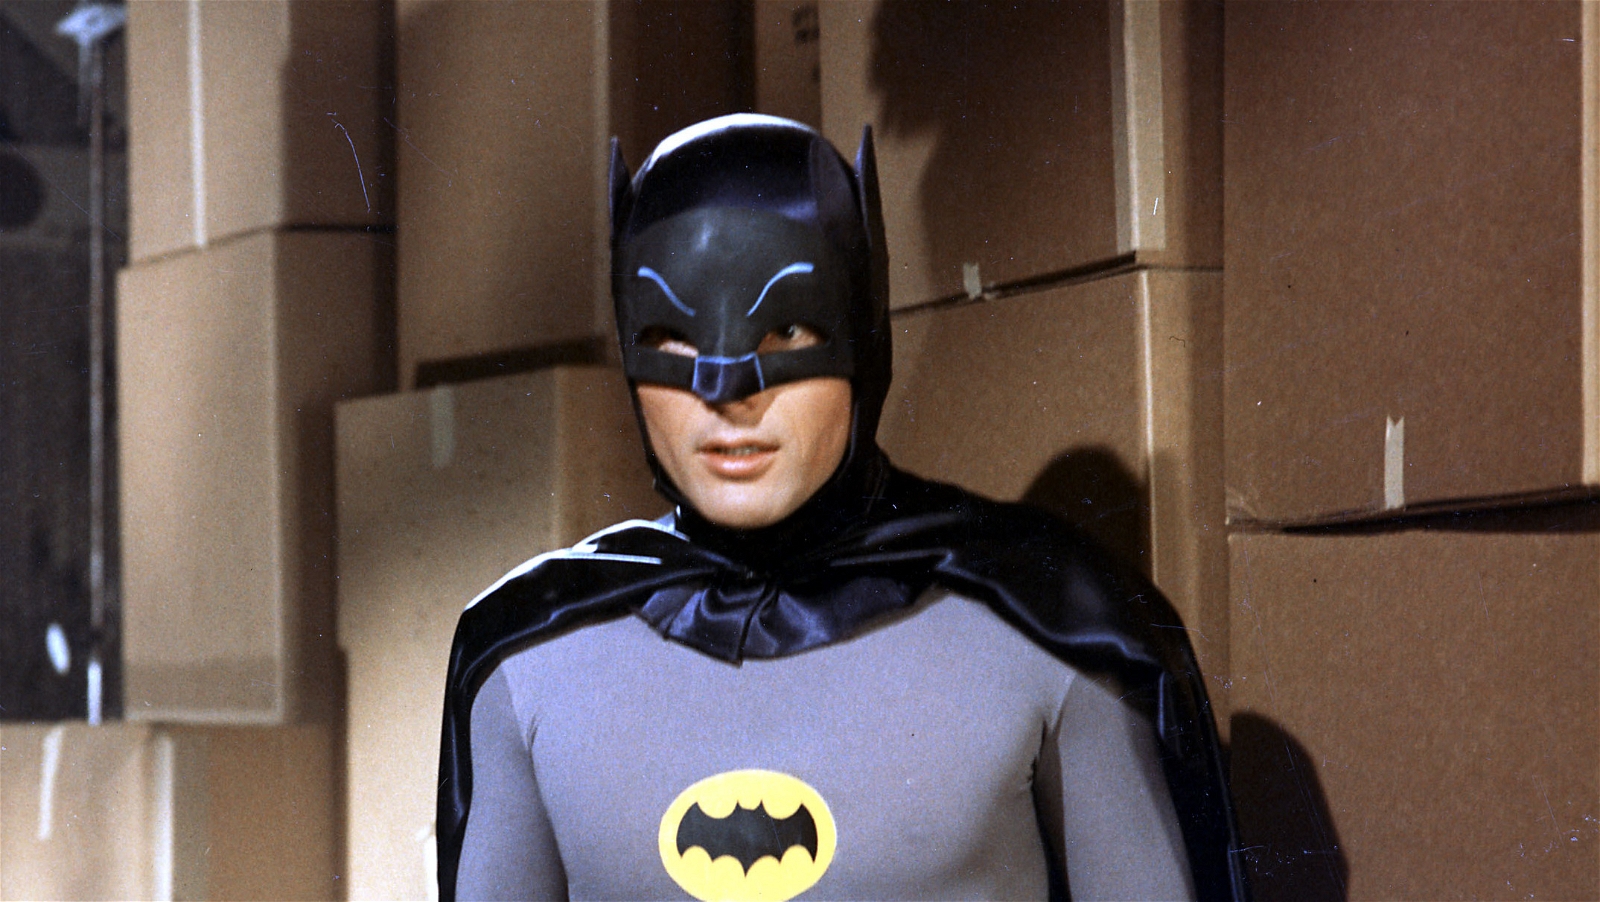 Christian Bale wasn't the only Batman actor to turn down James Bond role